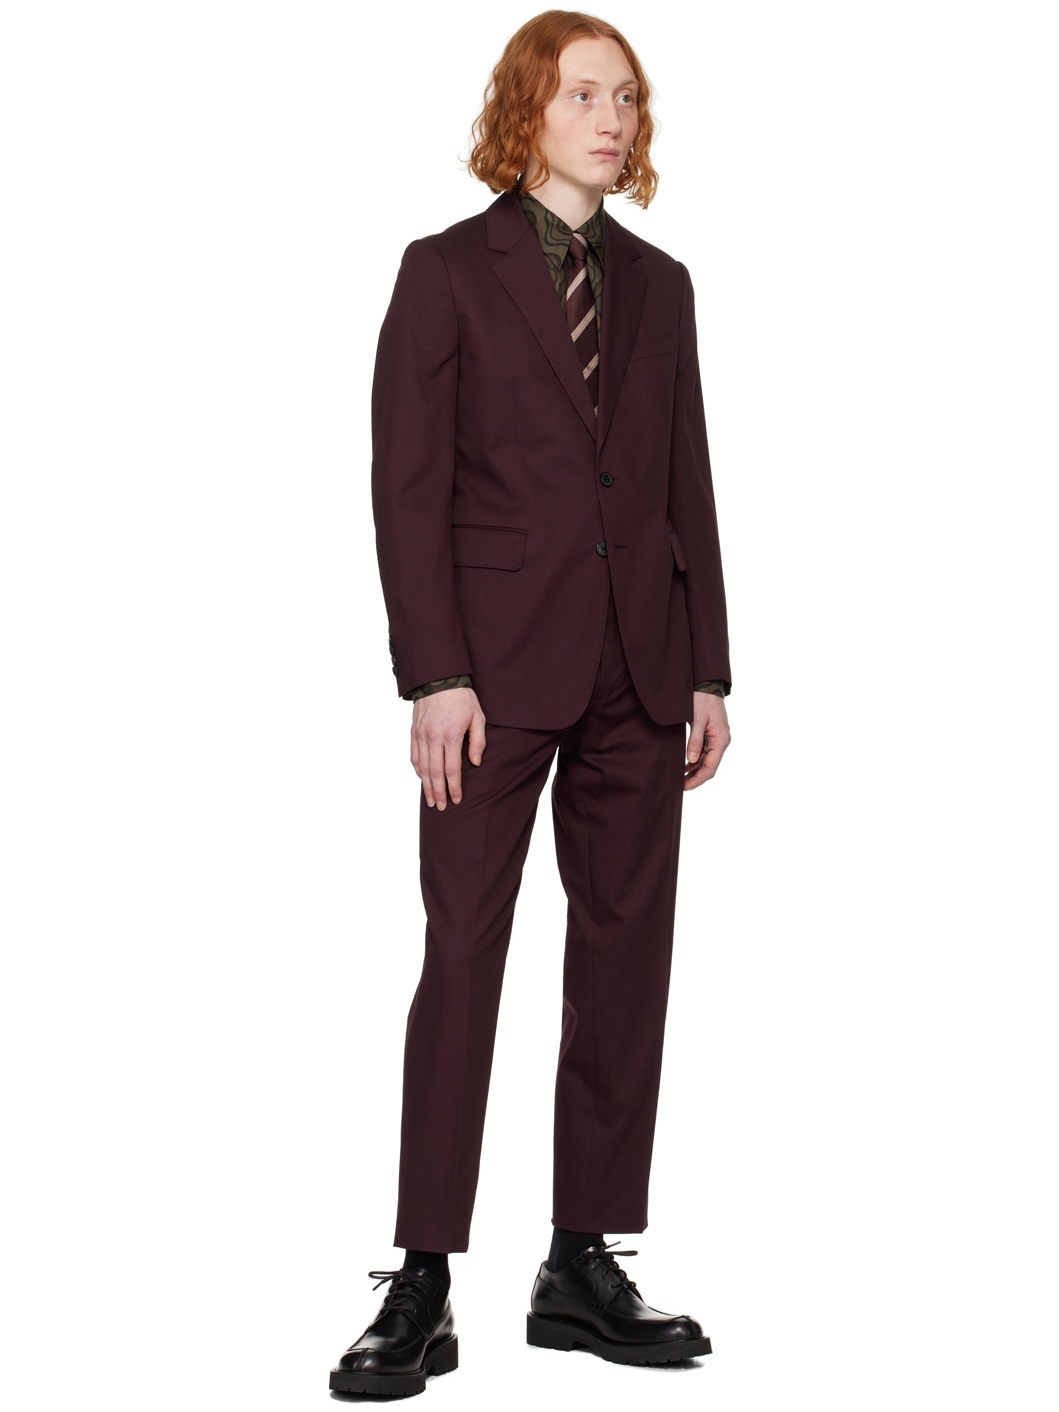 Burgundy Soft Constructed Suit - 5